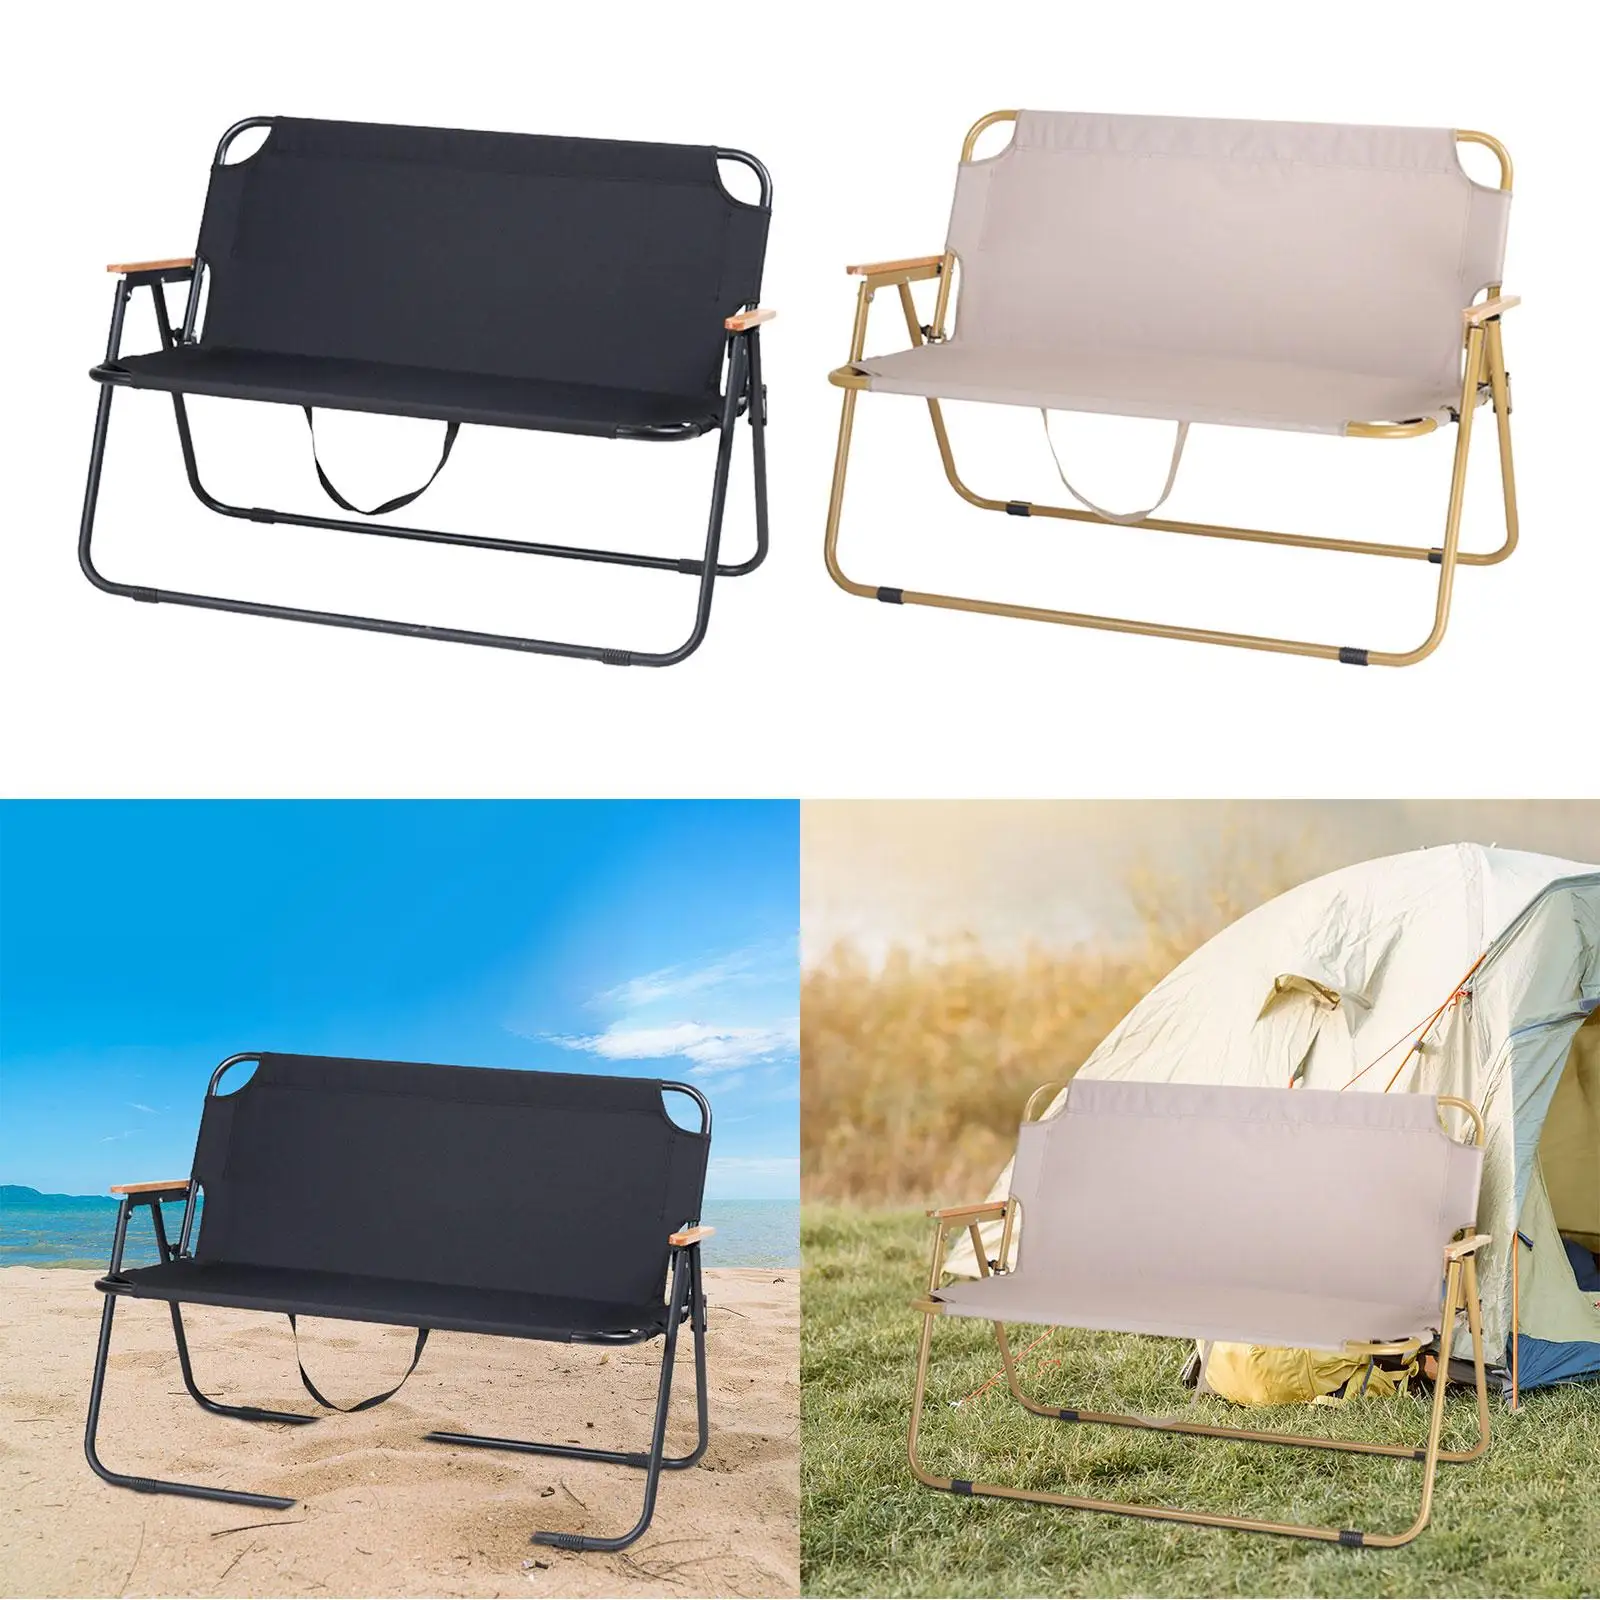 Folding Camping Chair Outdoor Hiking Travel Camping Seat Lightweight Fishing Backpacking Double Chair Patio Beach Chair Armchair